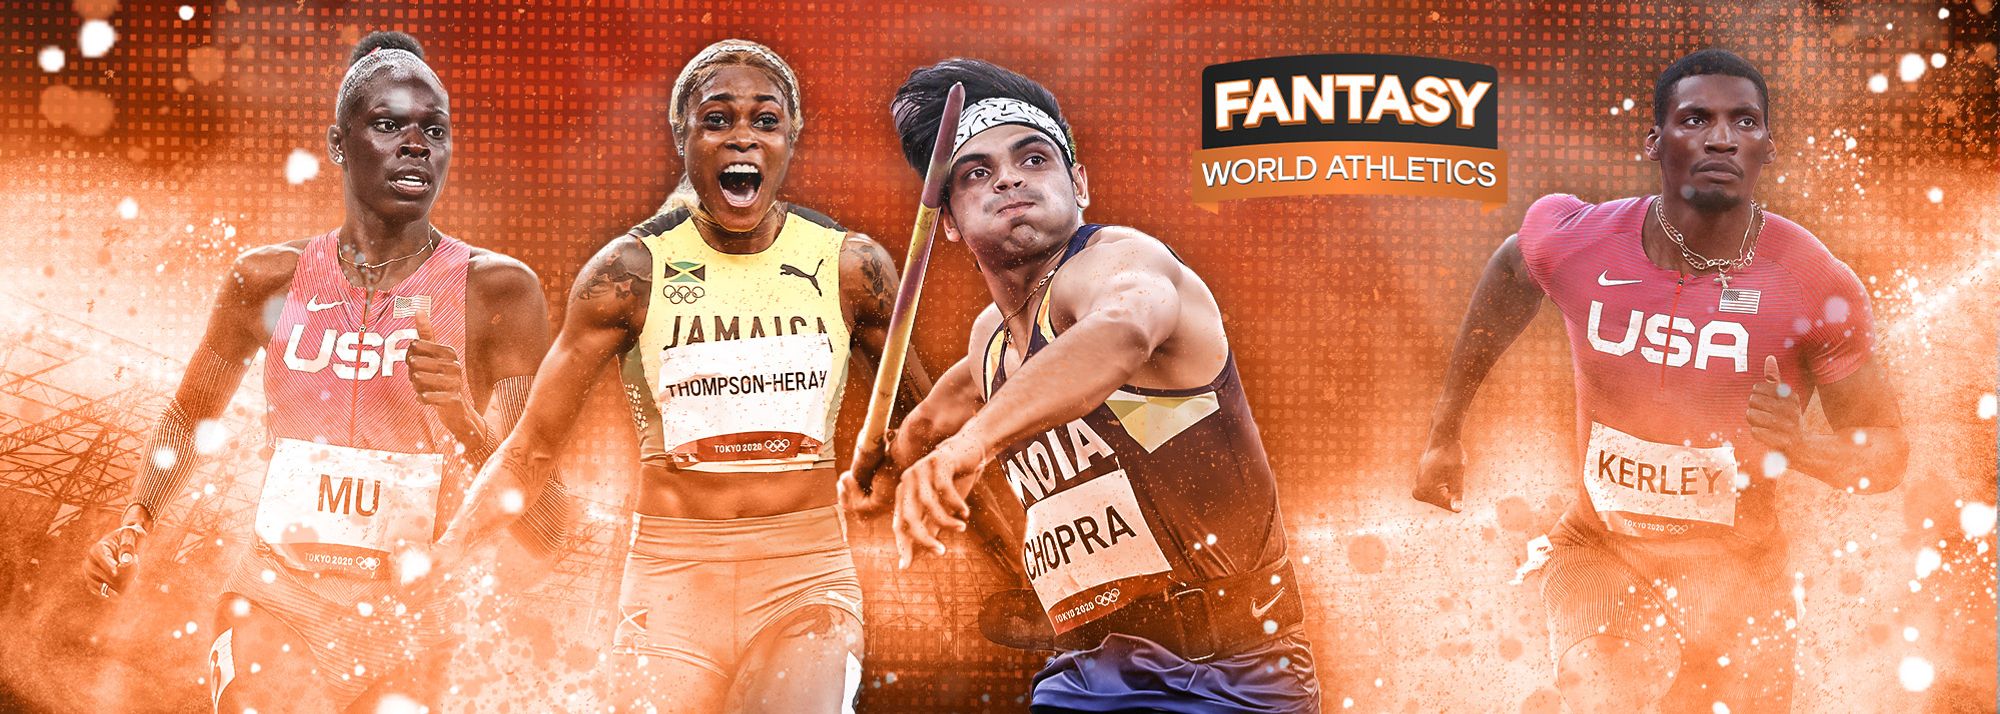 Play and win a VIP trip to the World Athletics Championships Budapest 23